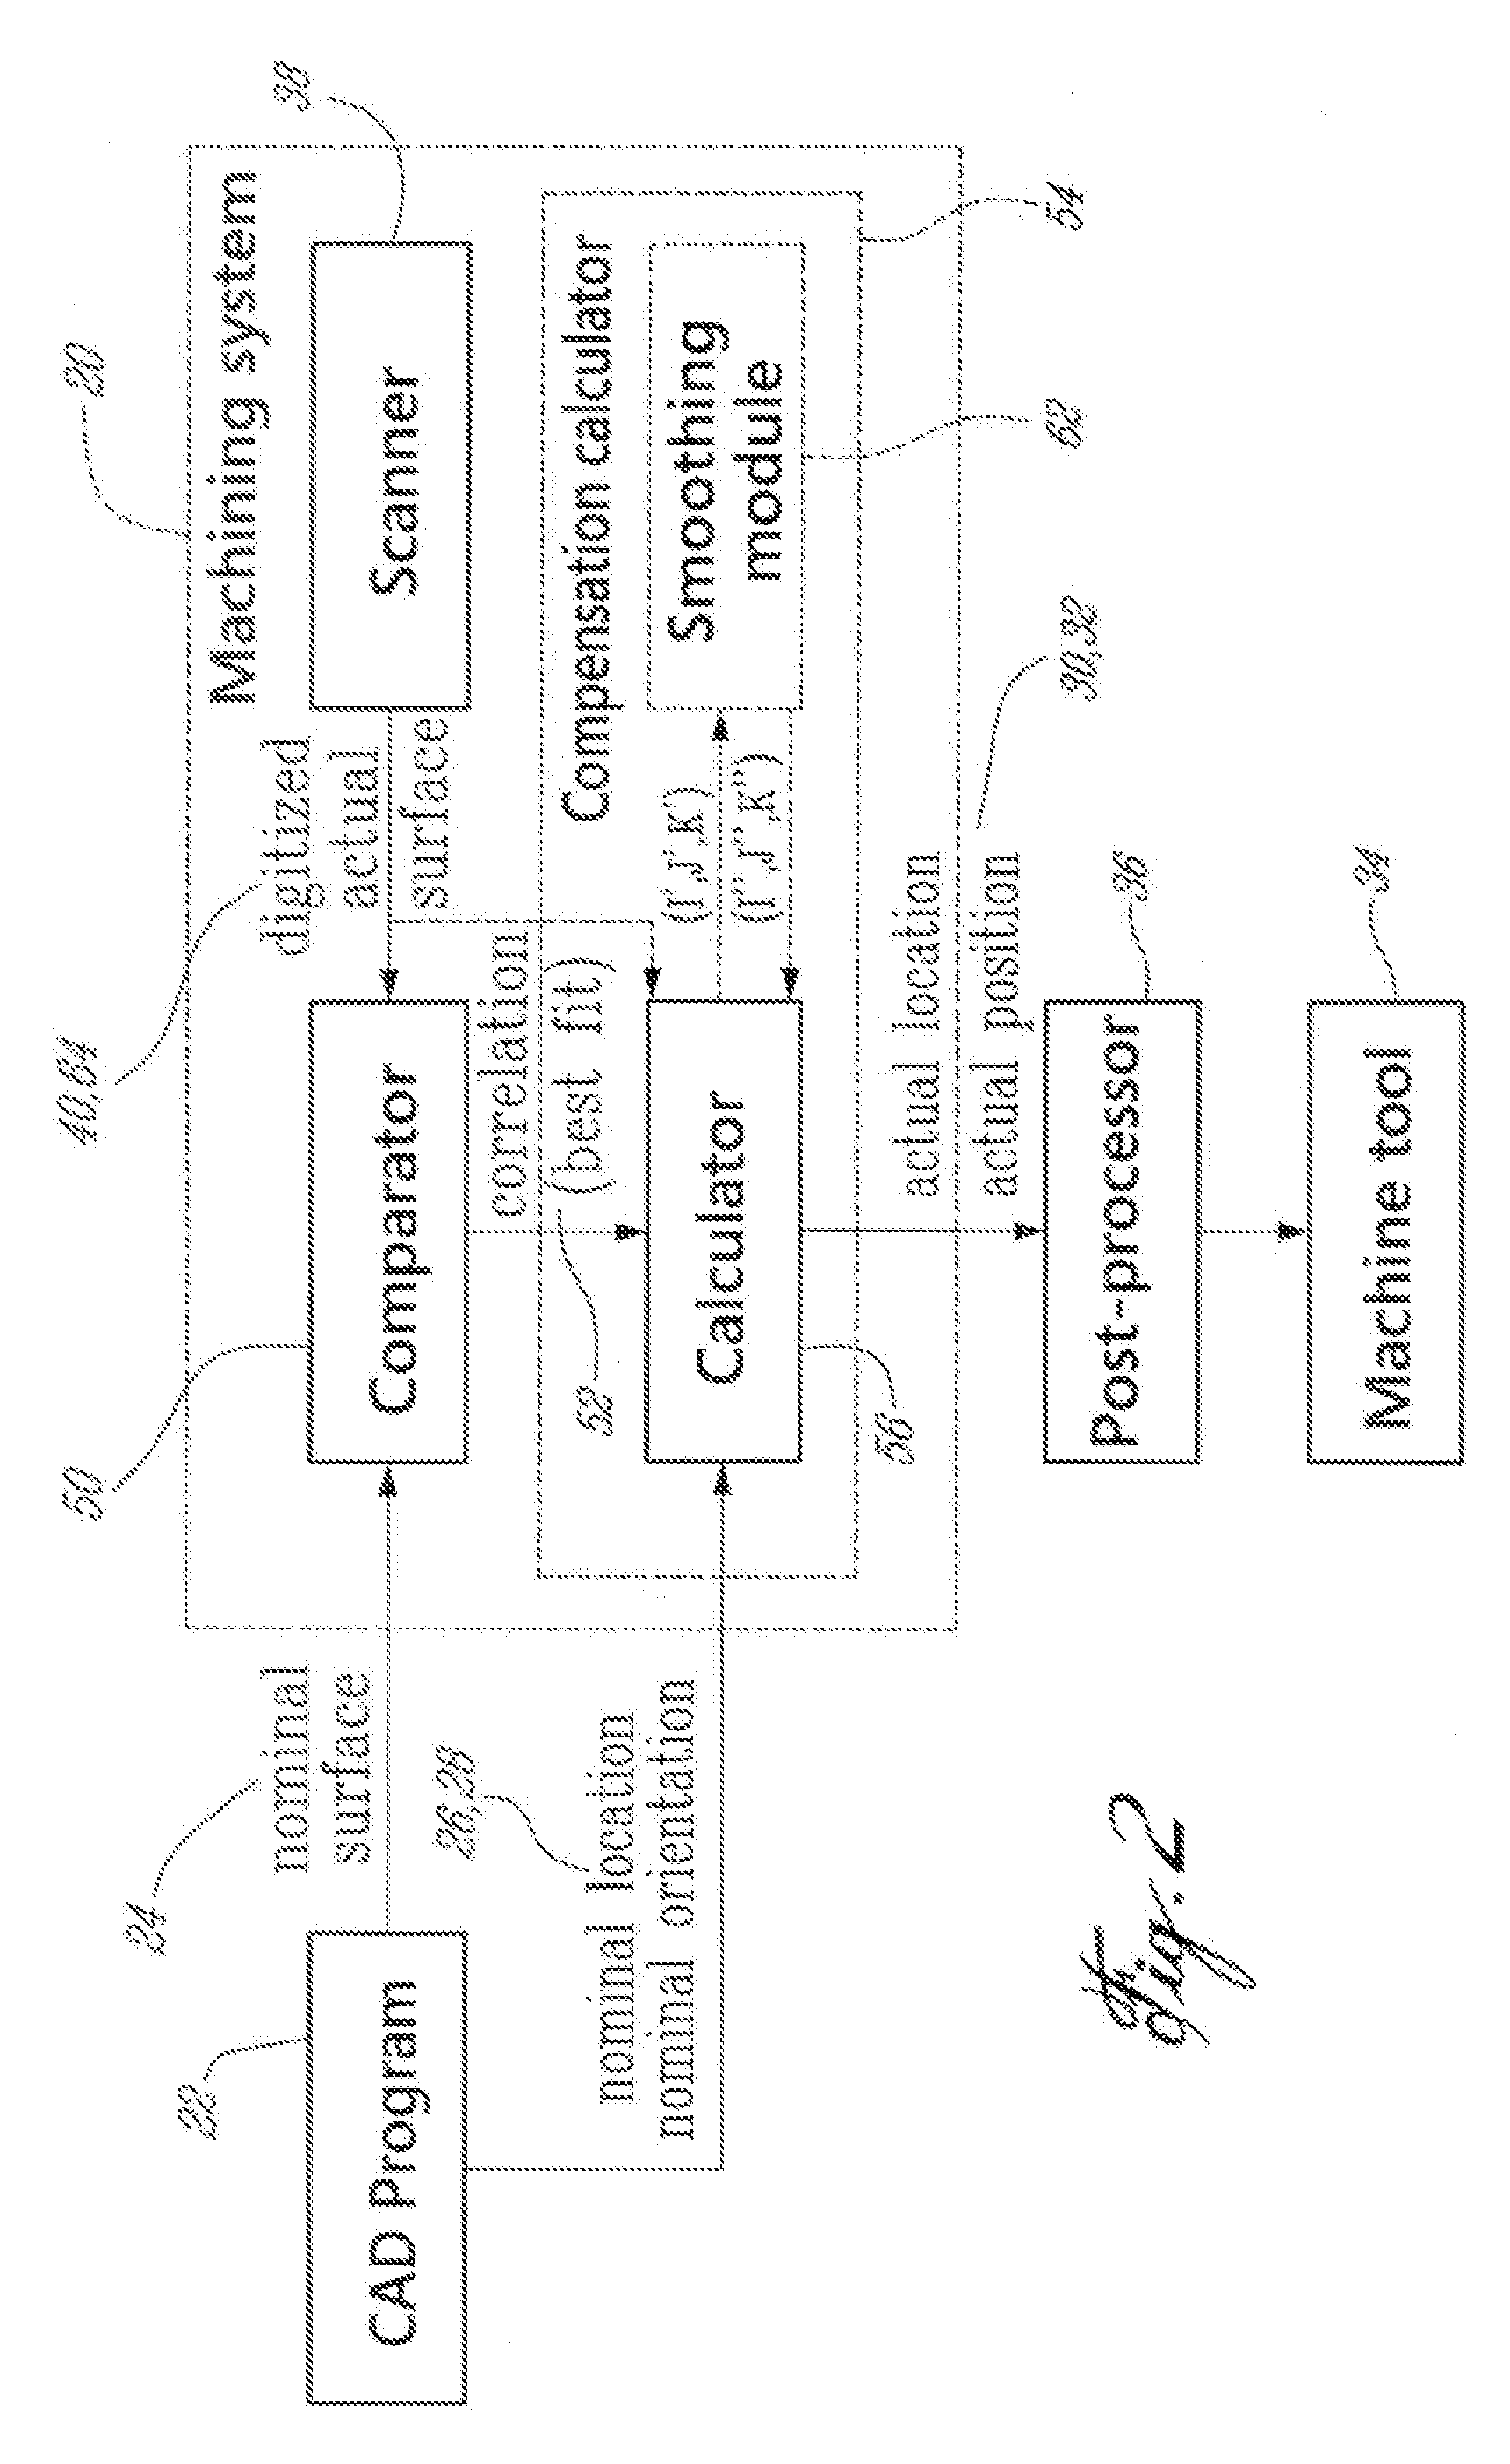 Method of making a part and related system